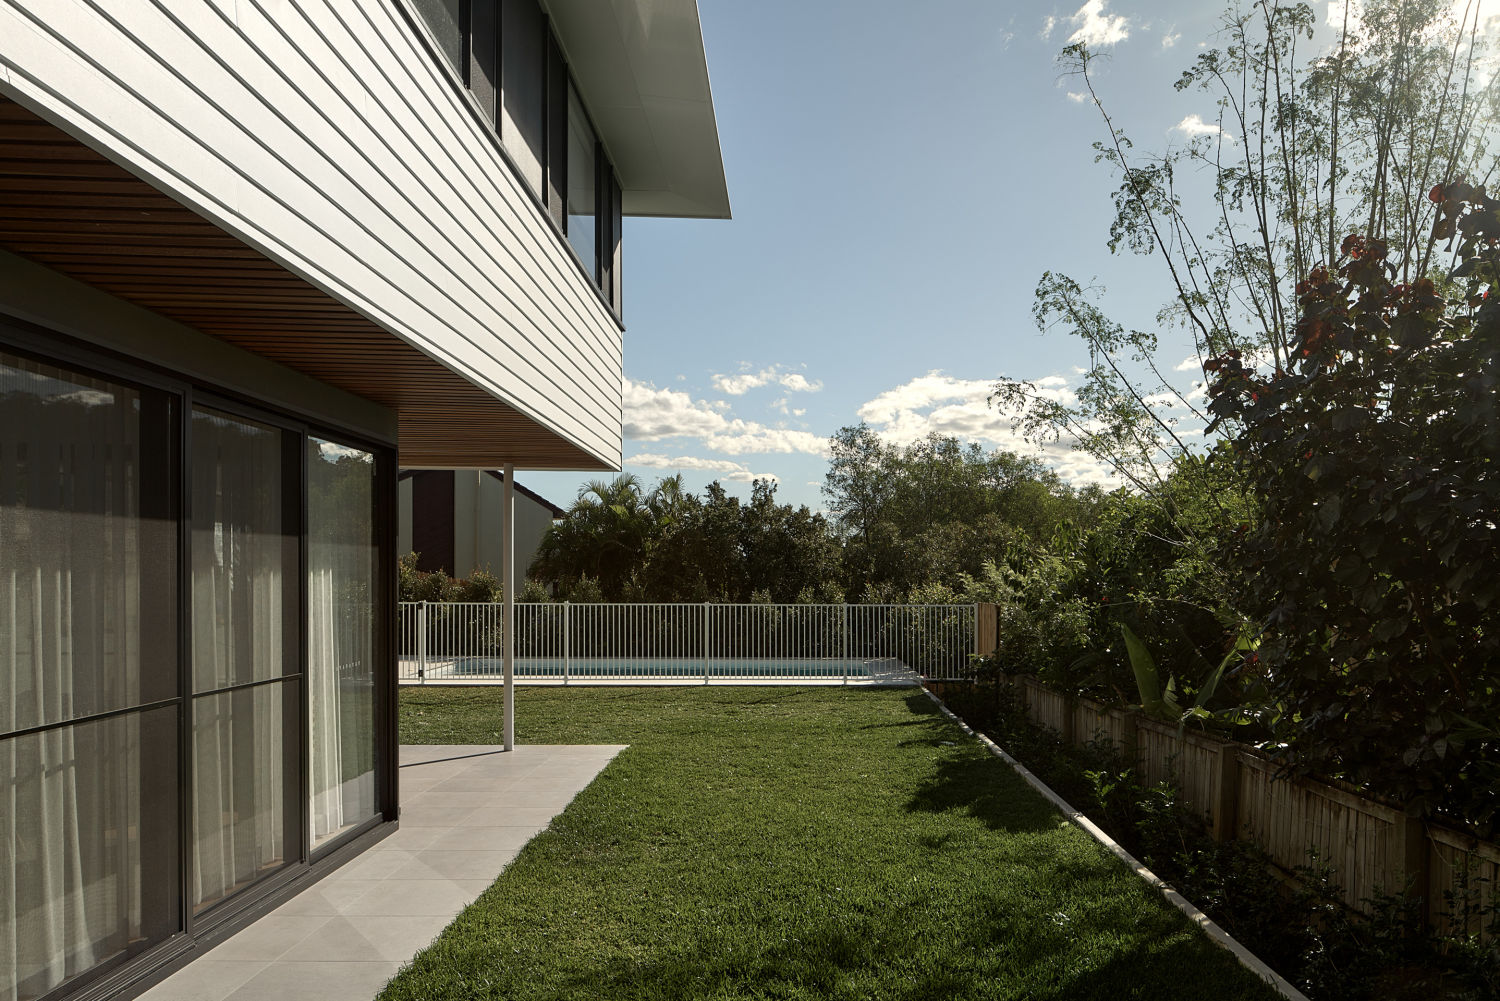 Welbeck Haus was designed to nestle into the sloping site and create space for panoramic views of the surrounding area.